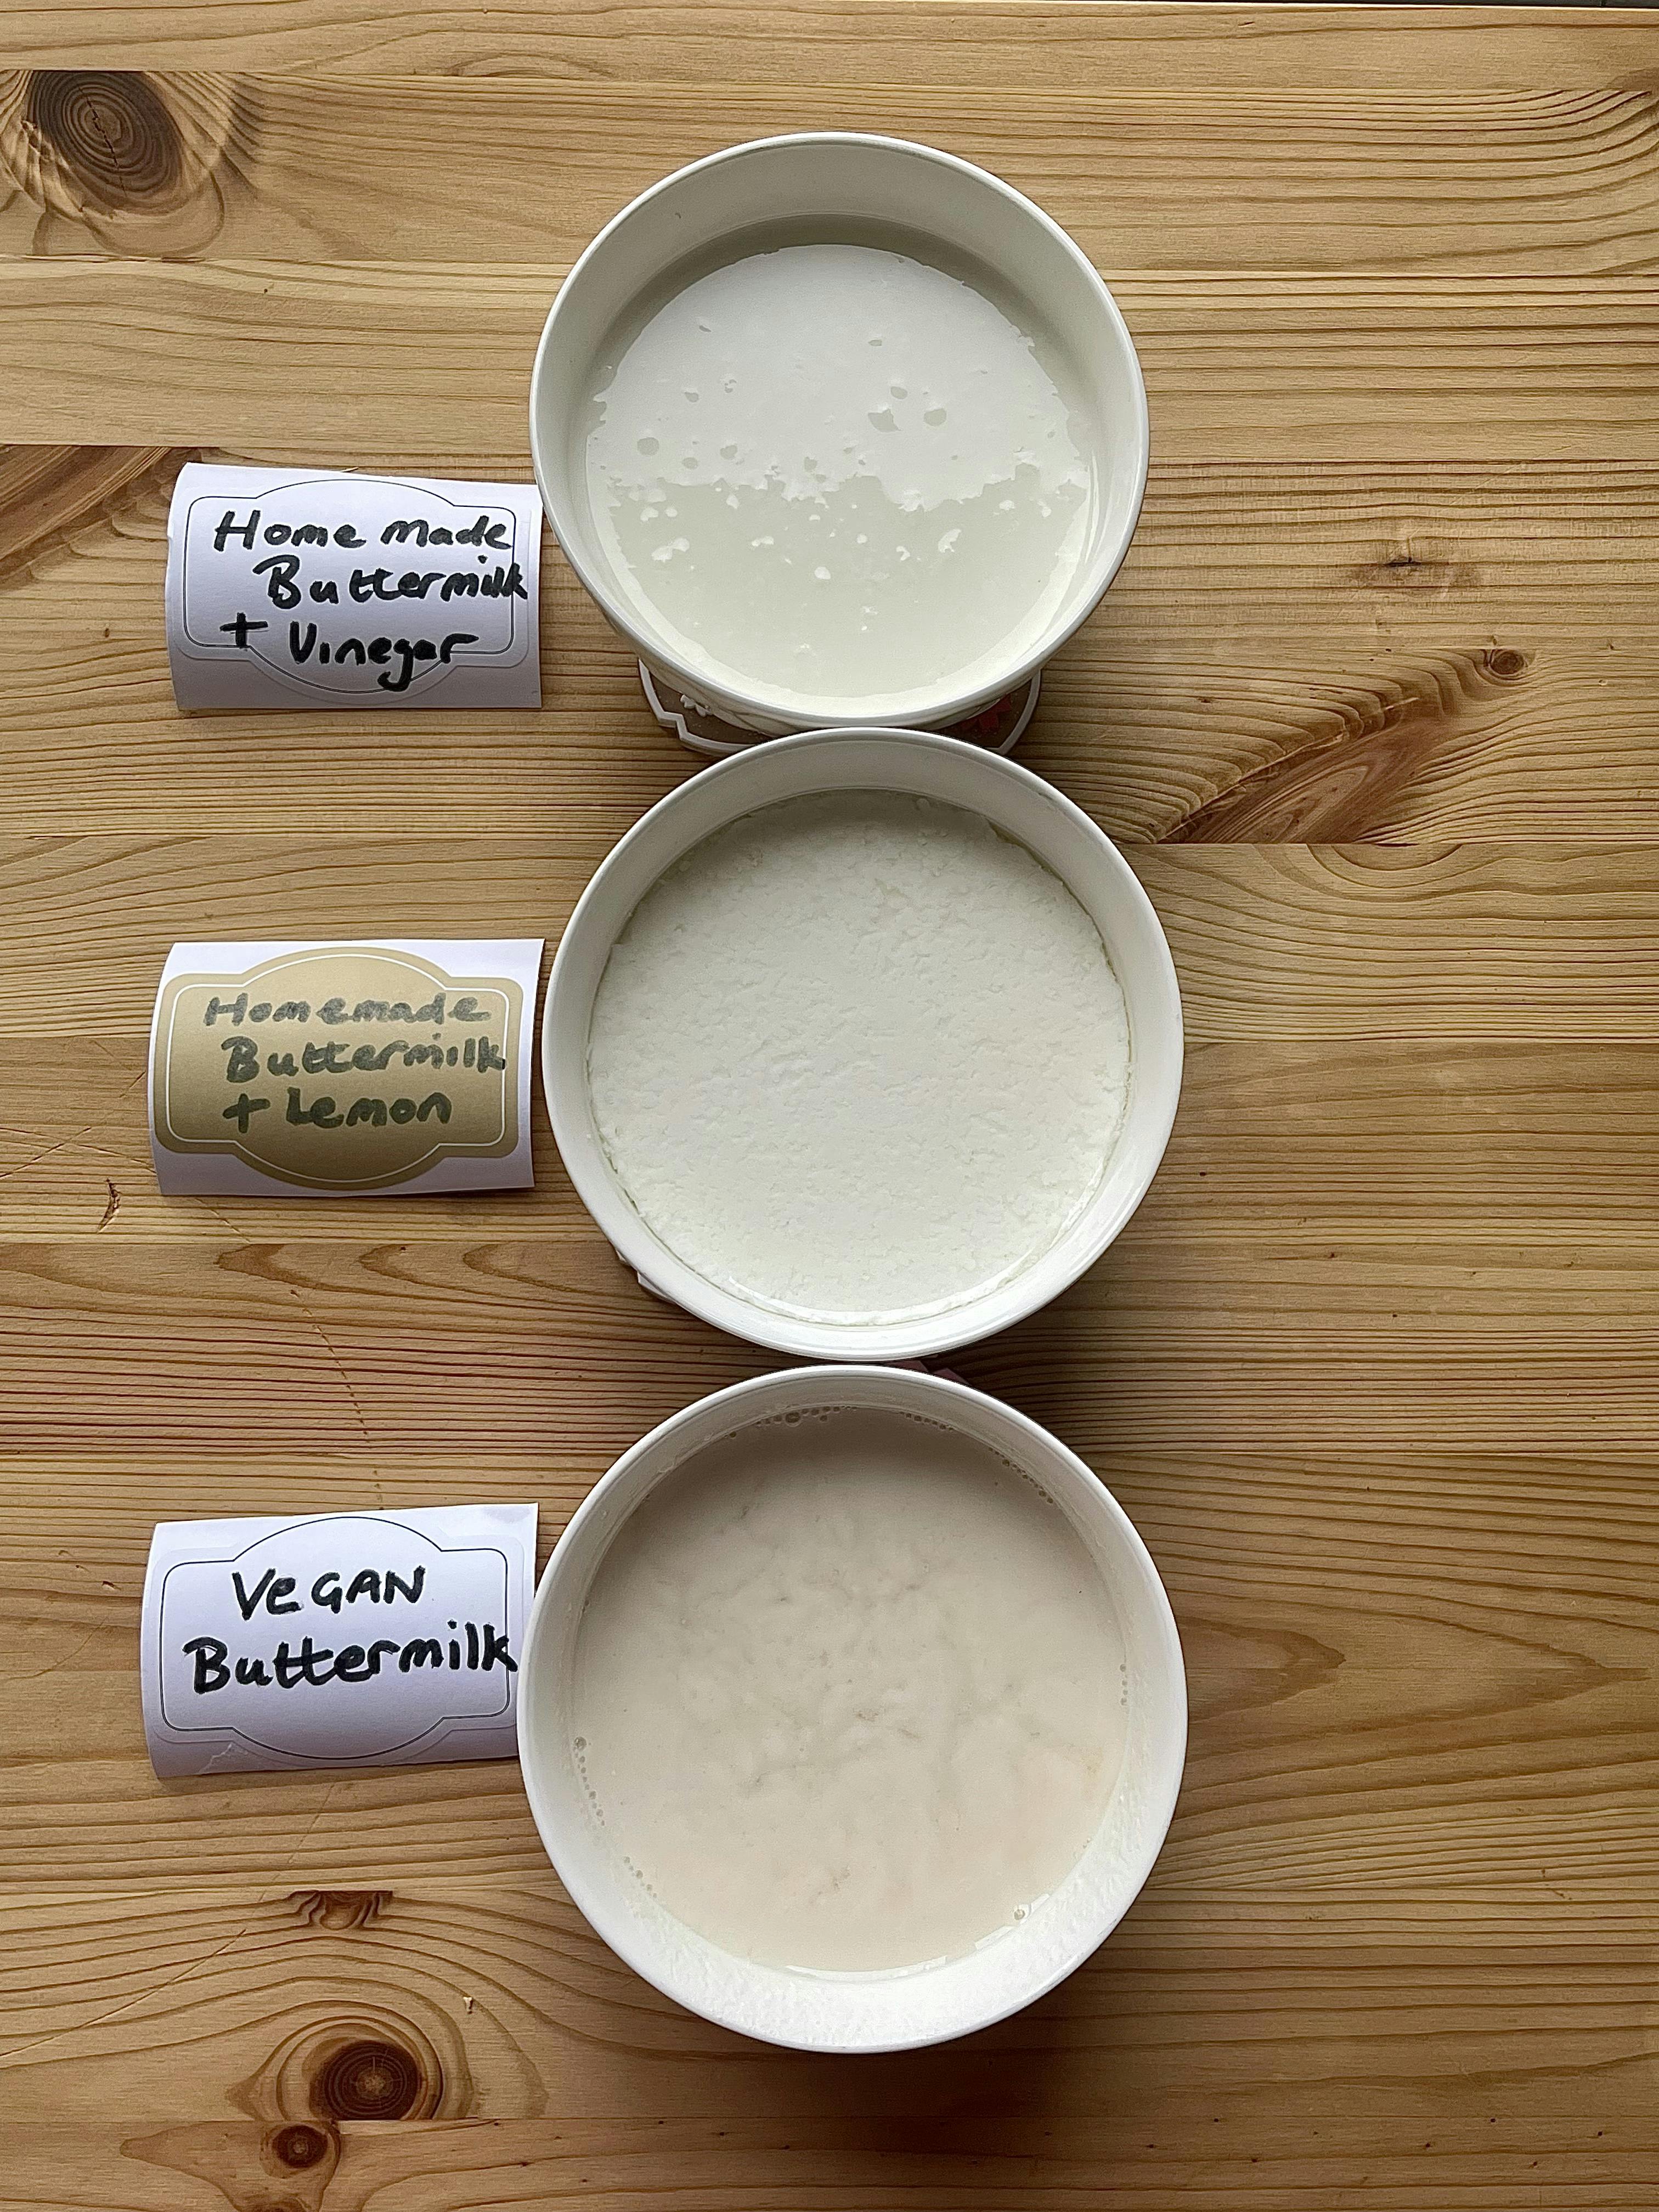 Picture for Homemade Buttermilk and homemade Vegan Buttermilk 